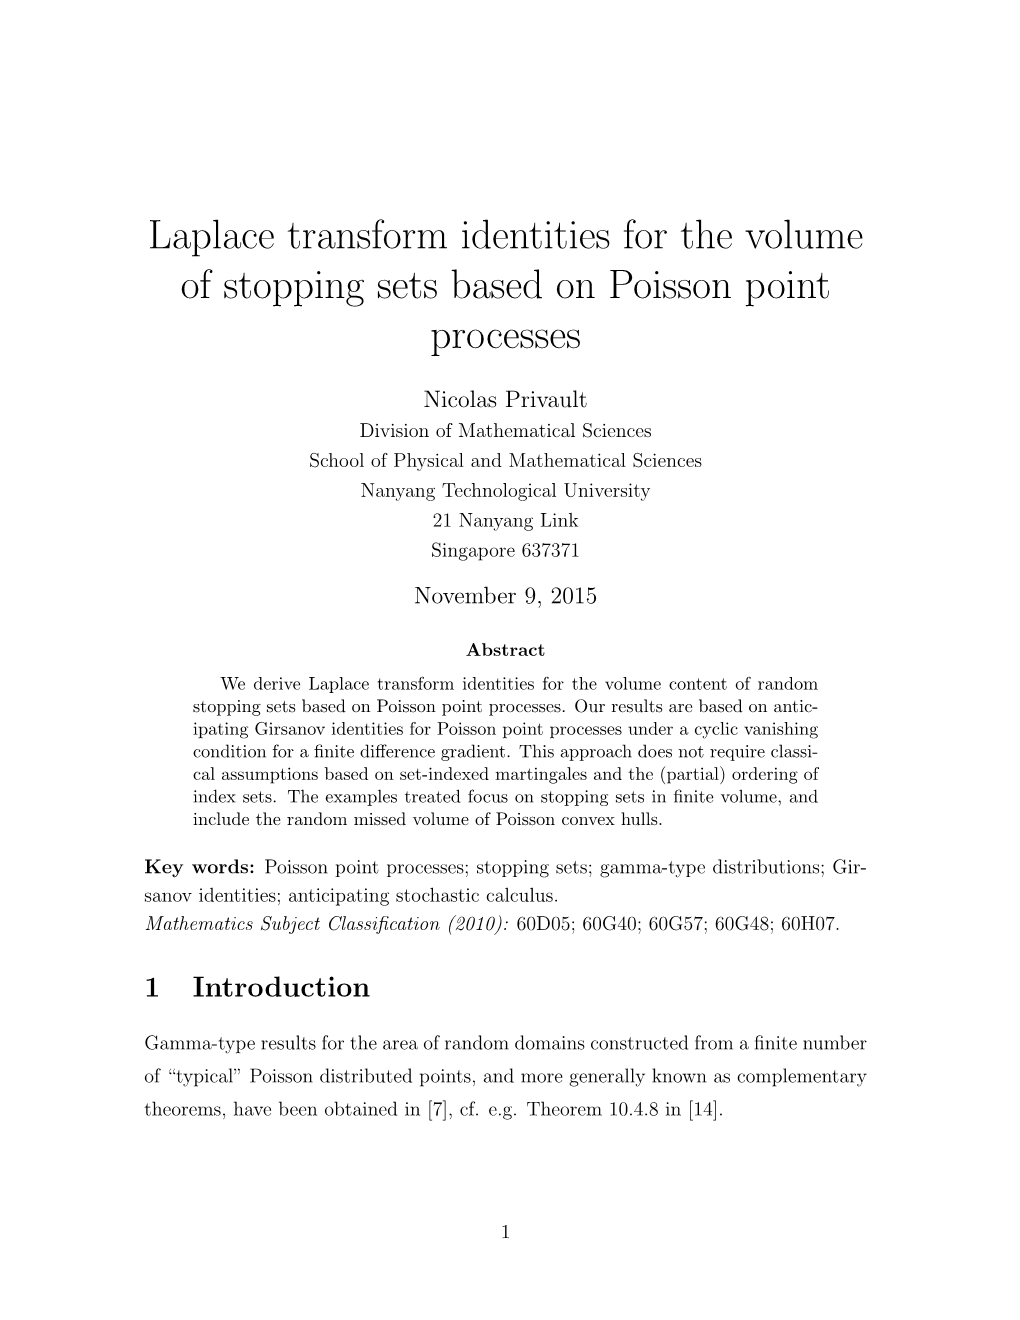 Laplace Transform Identities for the Volume of Stopping Sets Based on Poisson Point Processes